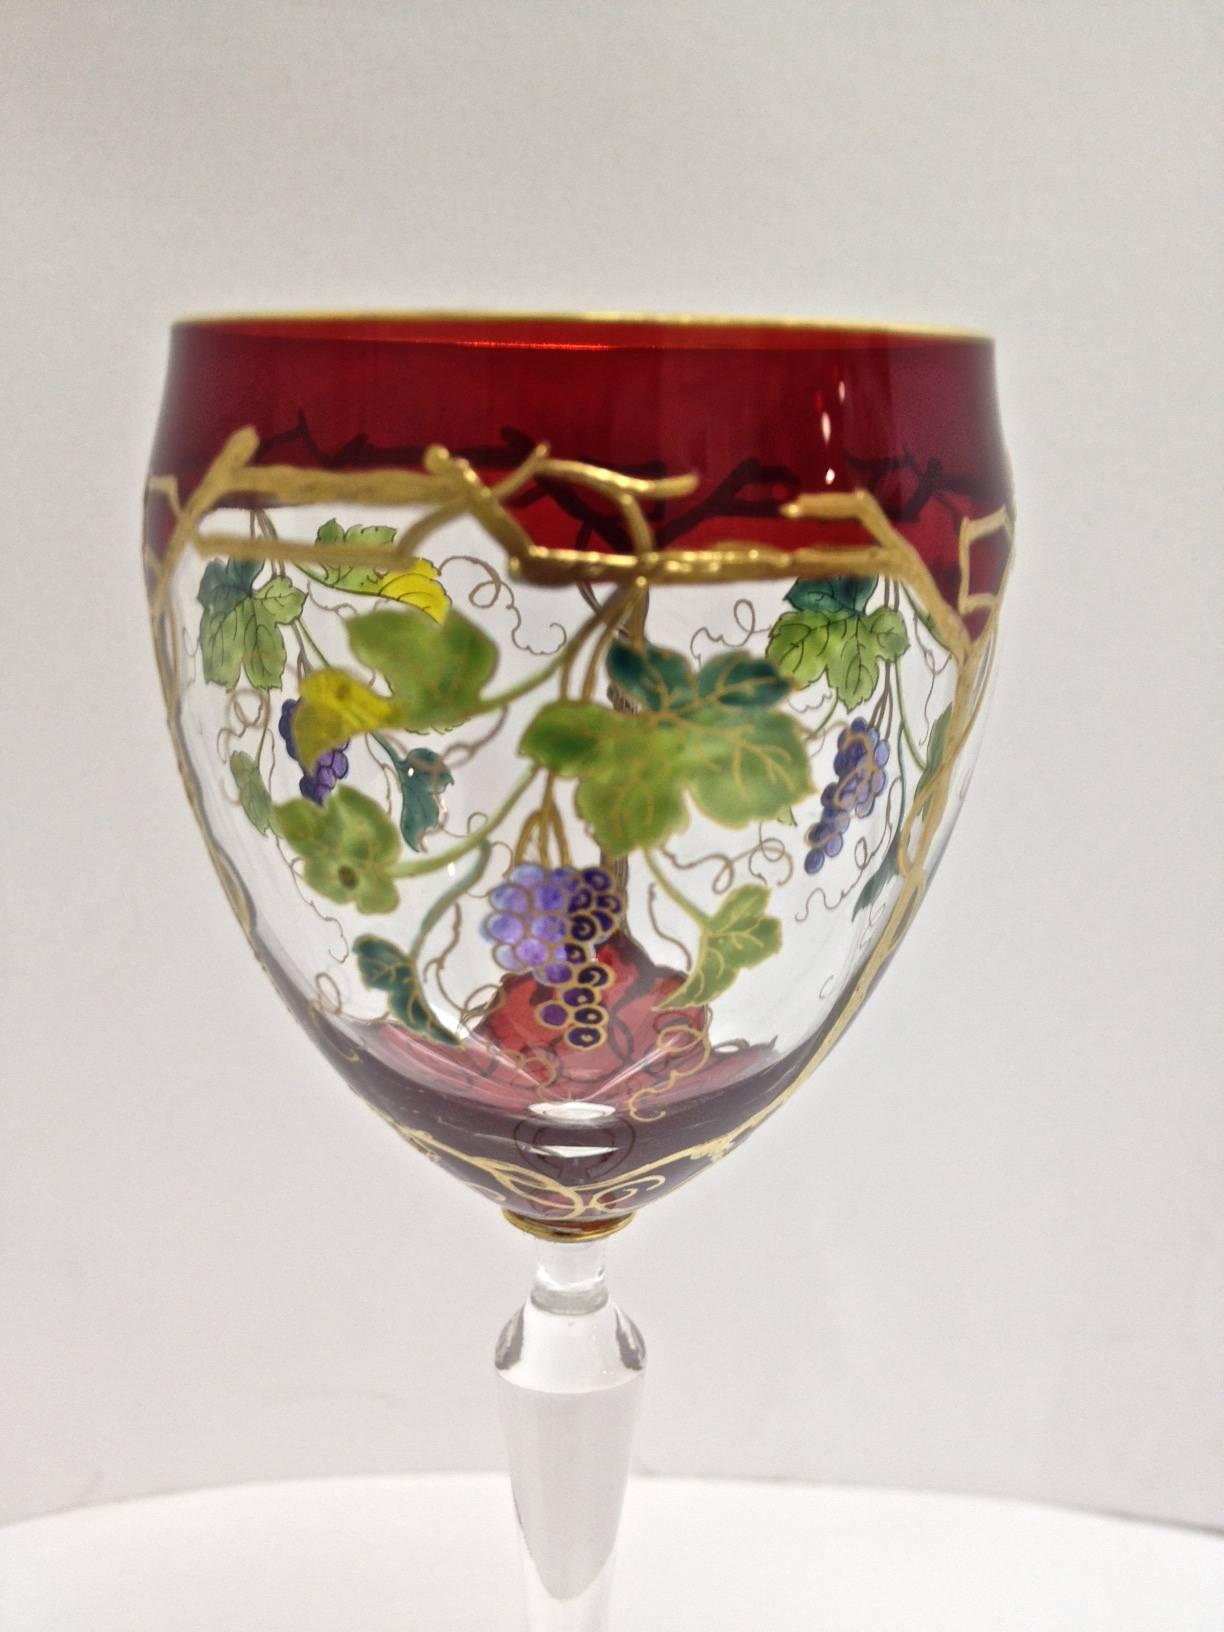 Art Nouveau enameled and gilt wine glasses so elegant the raised gilt highlight
The red glass and beautiful enameled grape vines. Perfect for Christmas and of course all year long as well. Picture these on the shelf in your bar.